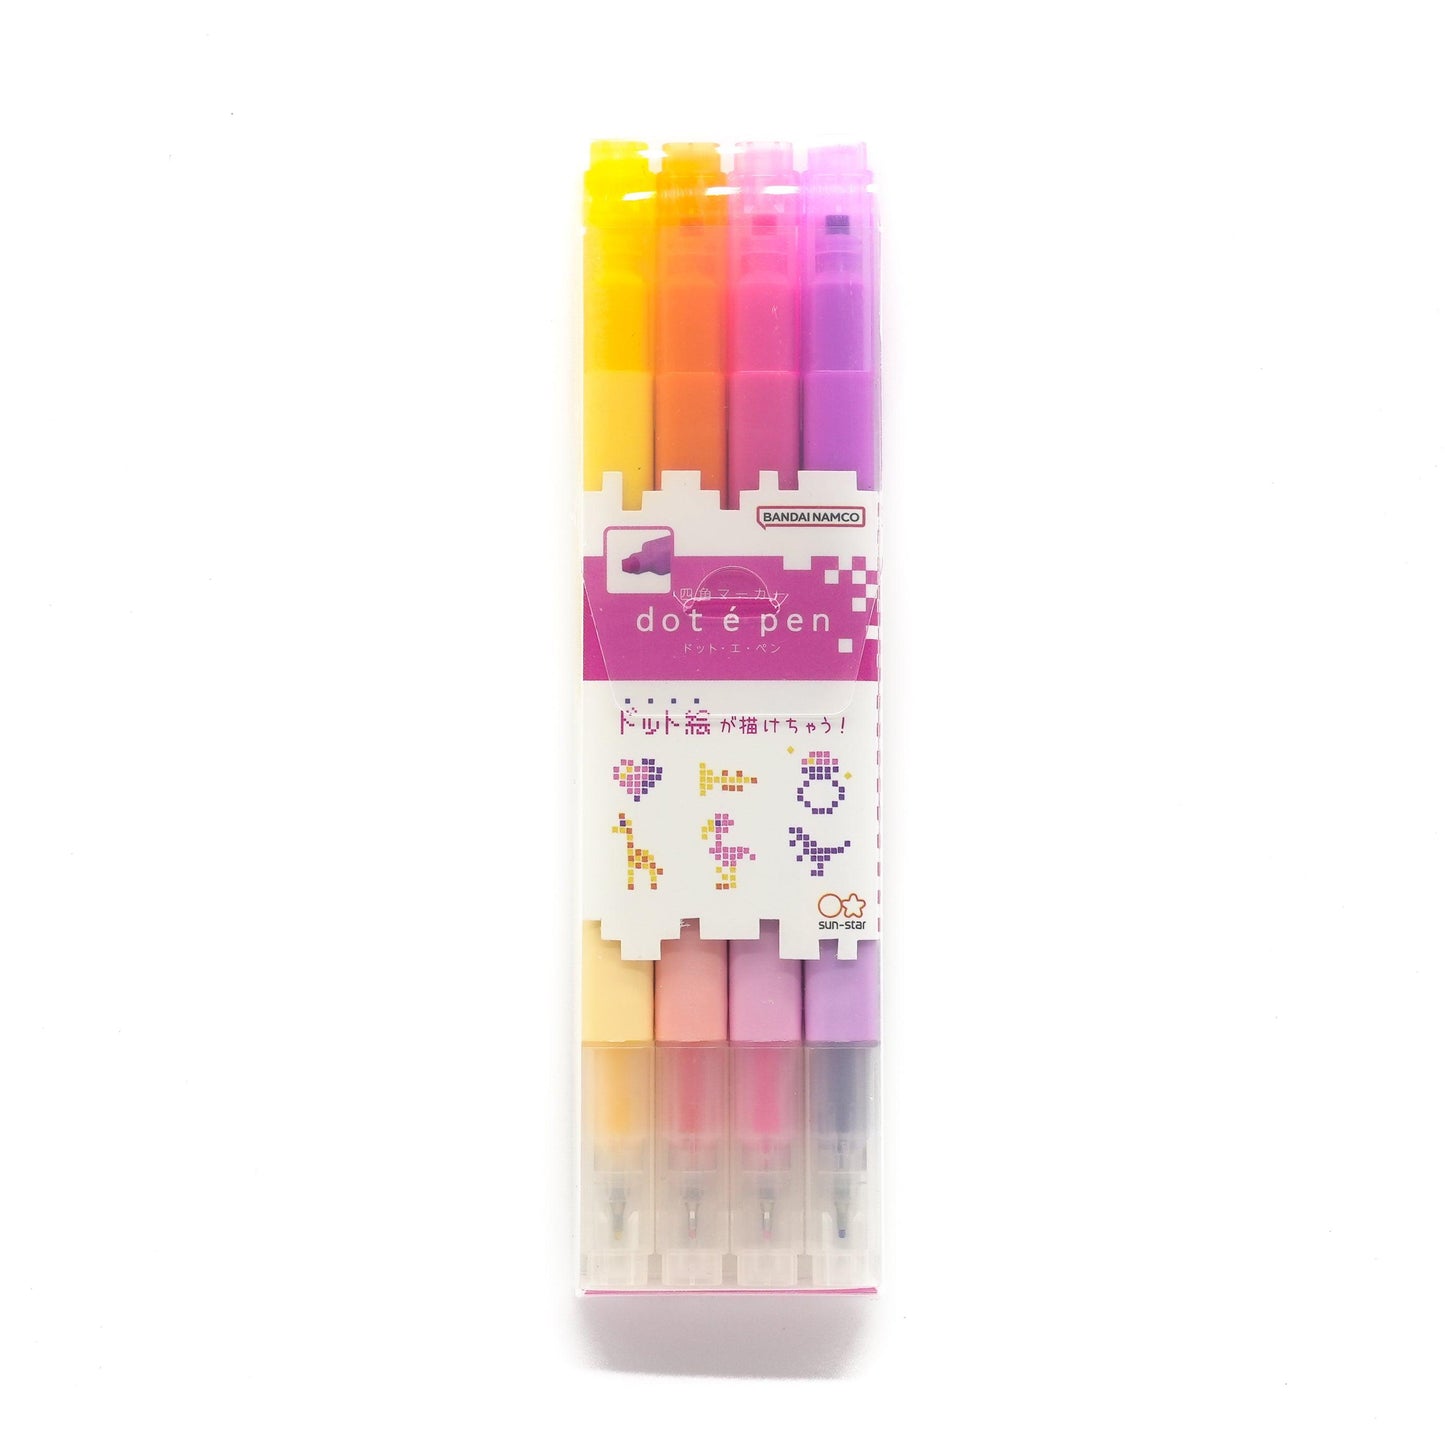 https://chl-store.com/cdn/shop/products/highlighter-sun-star-dot-e-pen-water-based-four-corners-2-brushes-marker-painting-marker-art-supplies-stationery-creativity-art-student-office-girls-4-color-set-s4541-chl-store-2.jpg?v=1695885506&width=1445